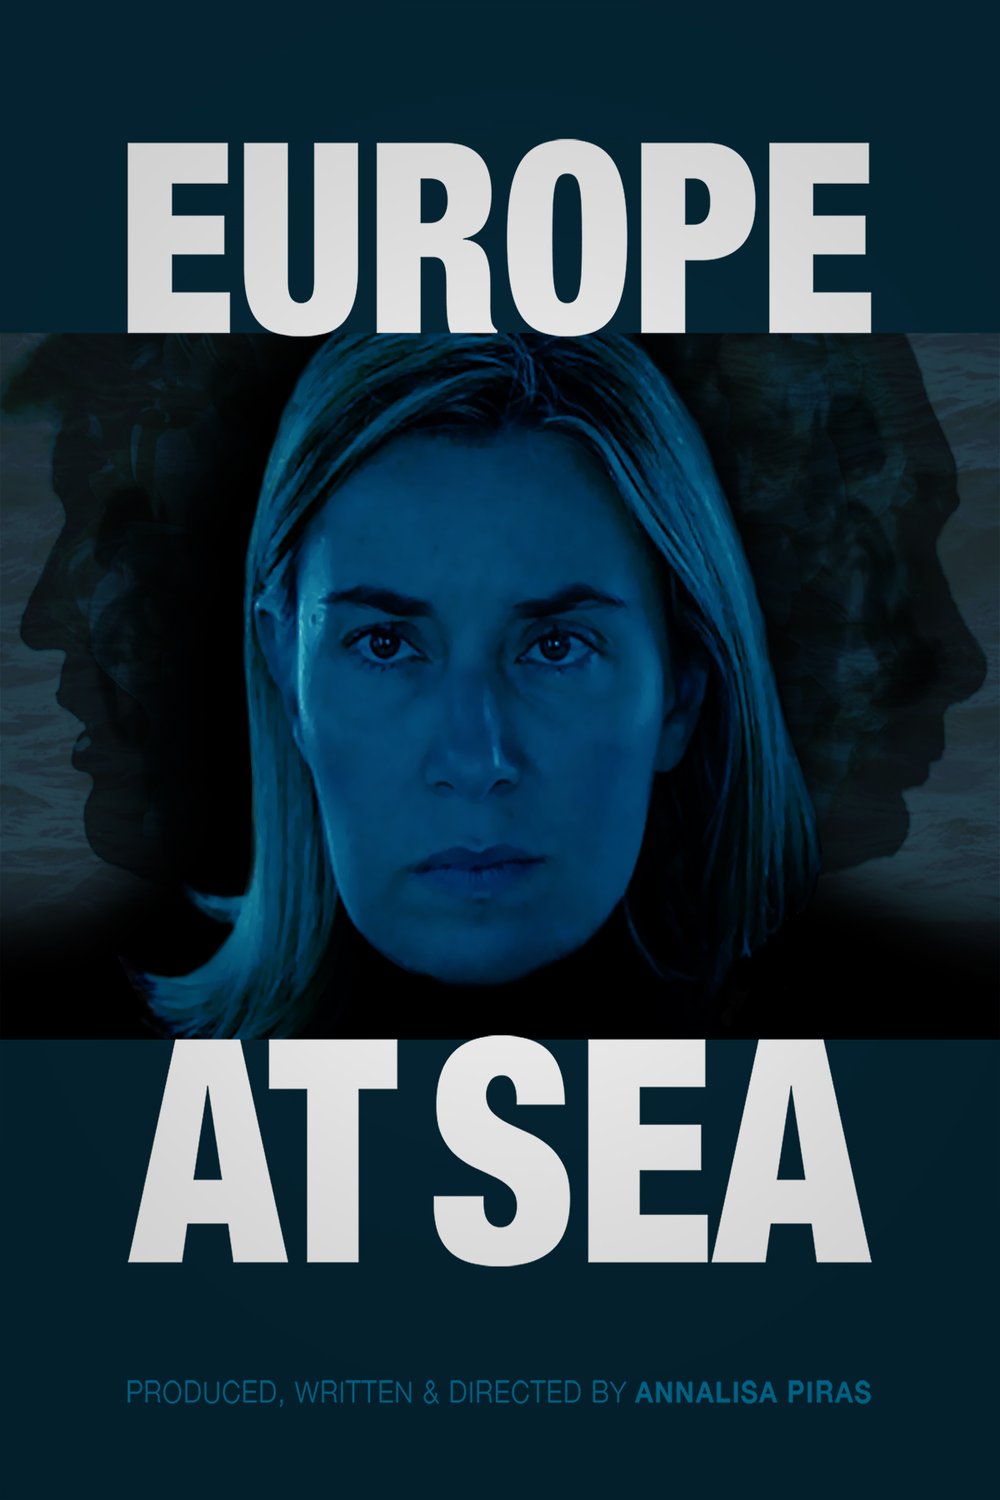 Poster of the movie Europe at Sea